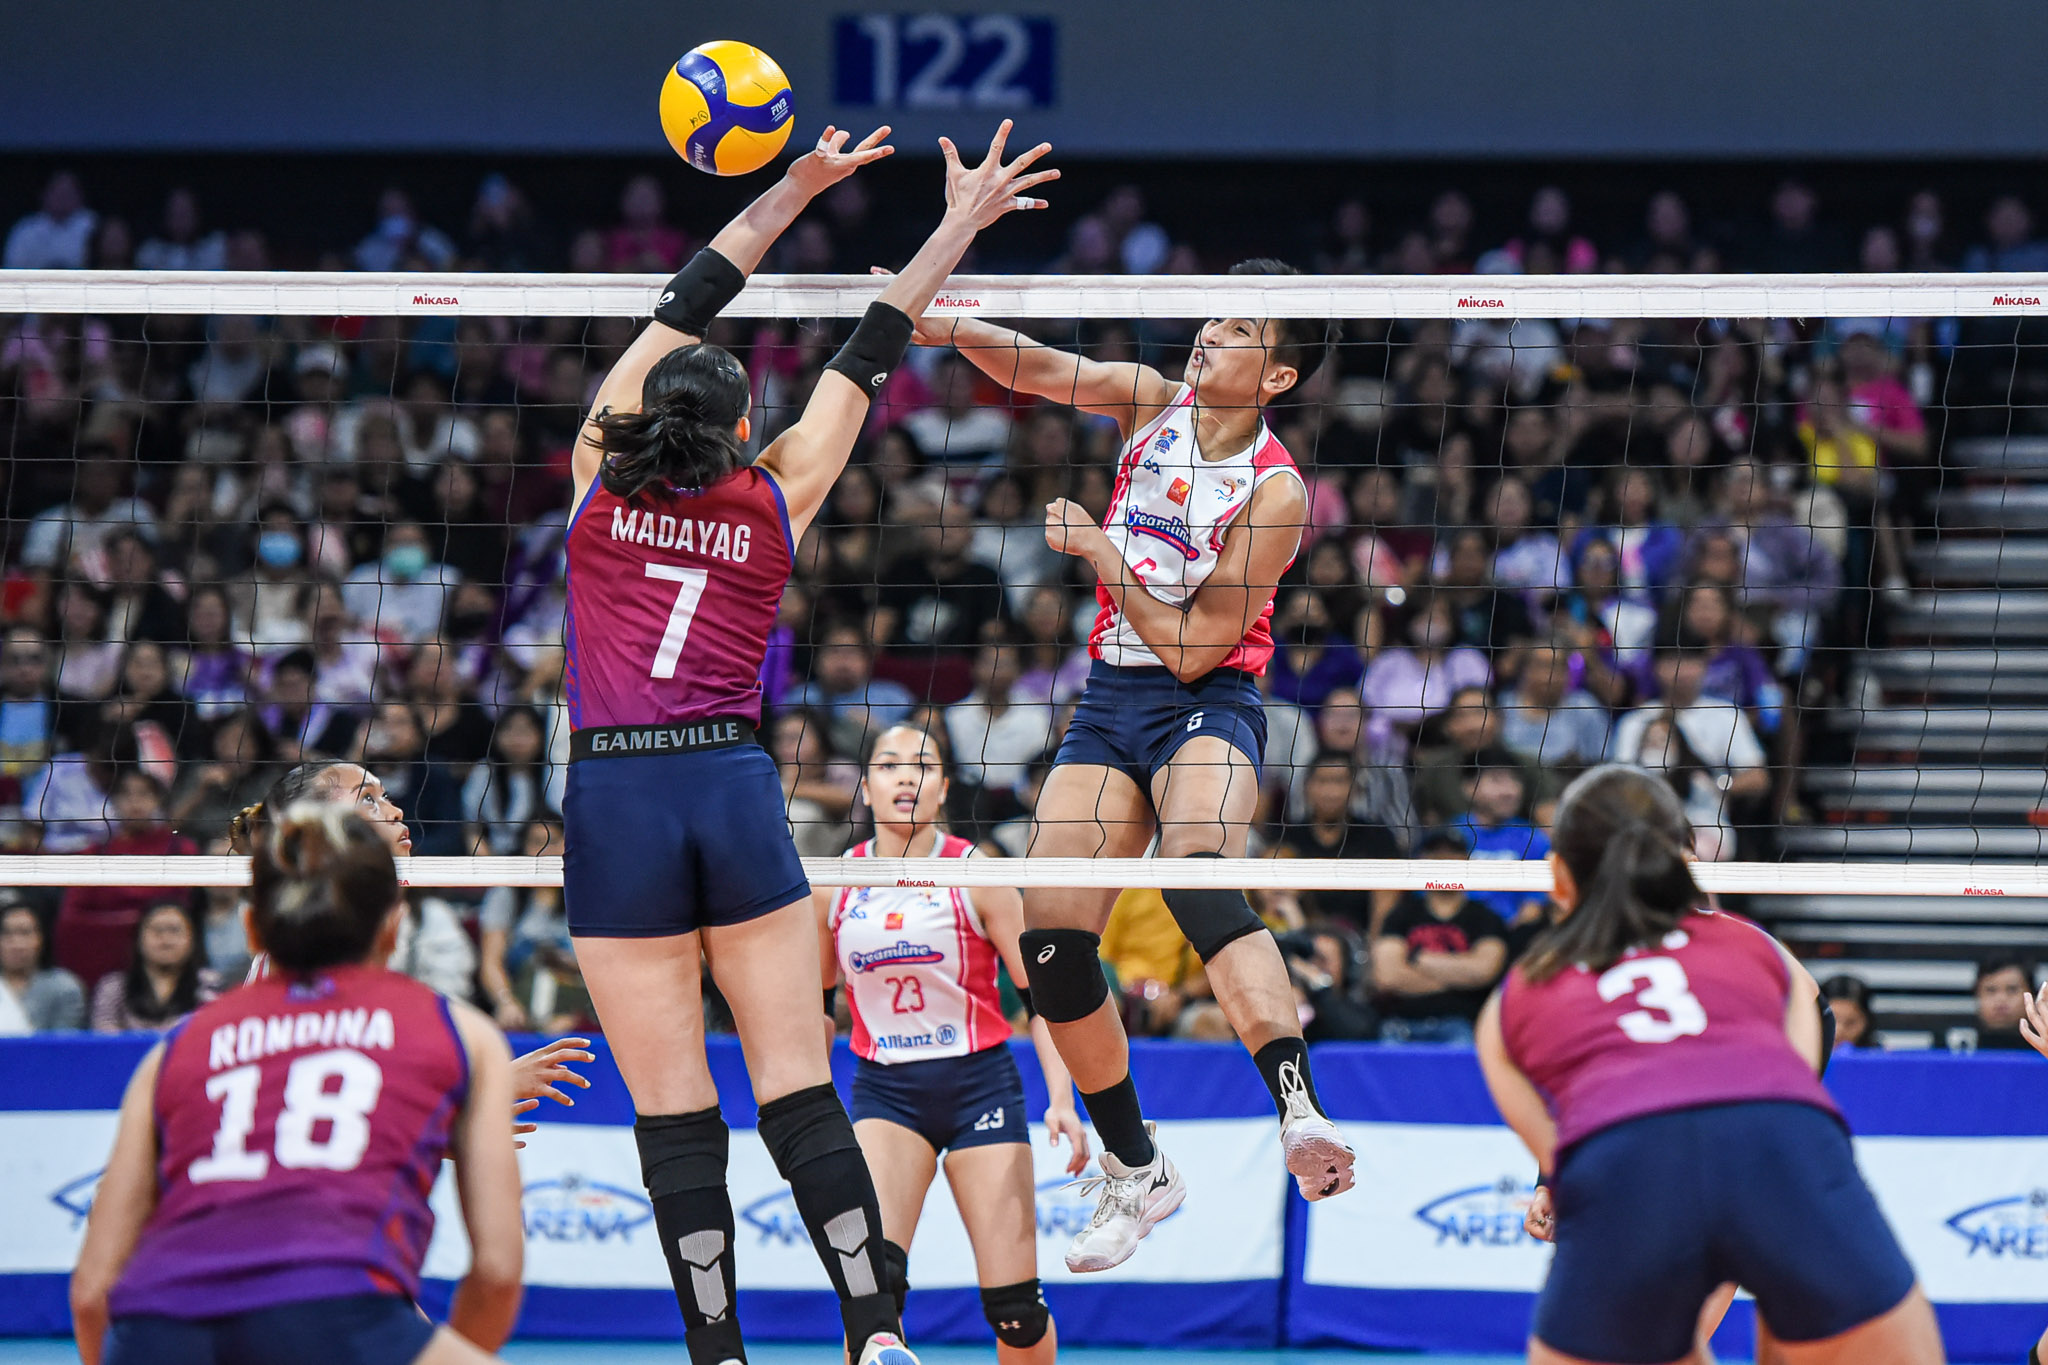 Creamline closing in on another PVL title after defeating Choco Mucho ...